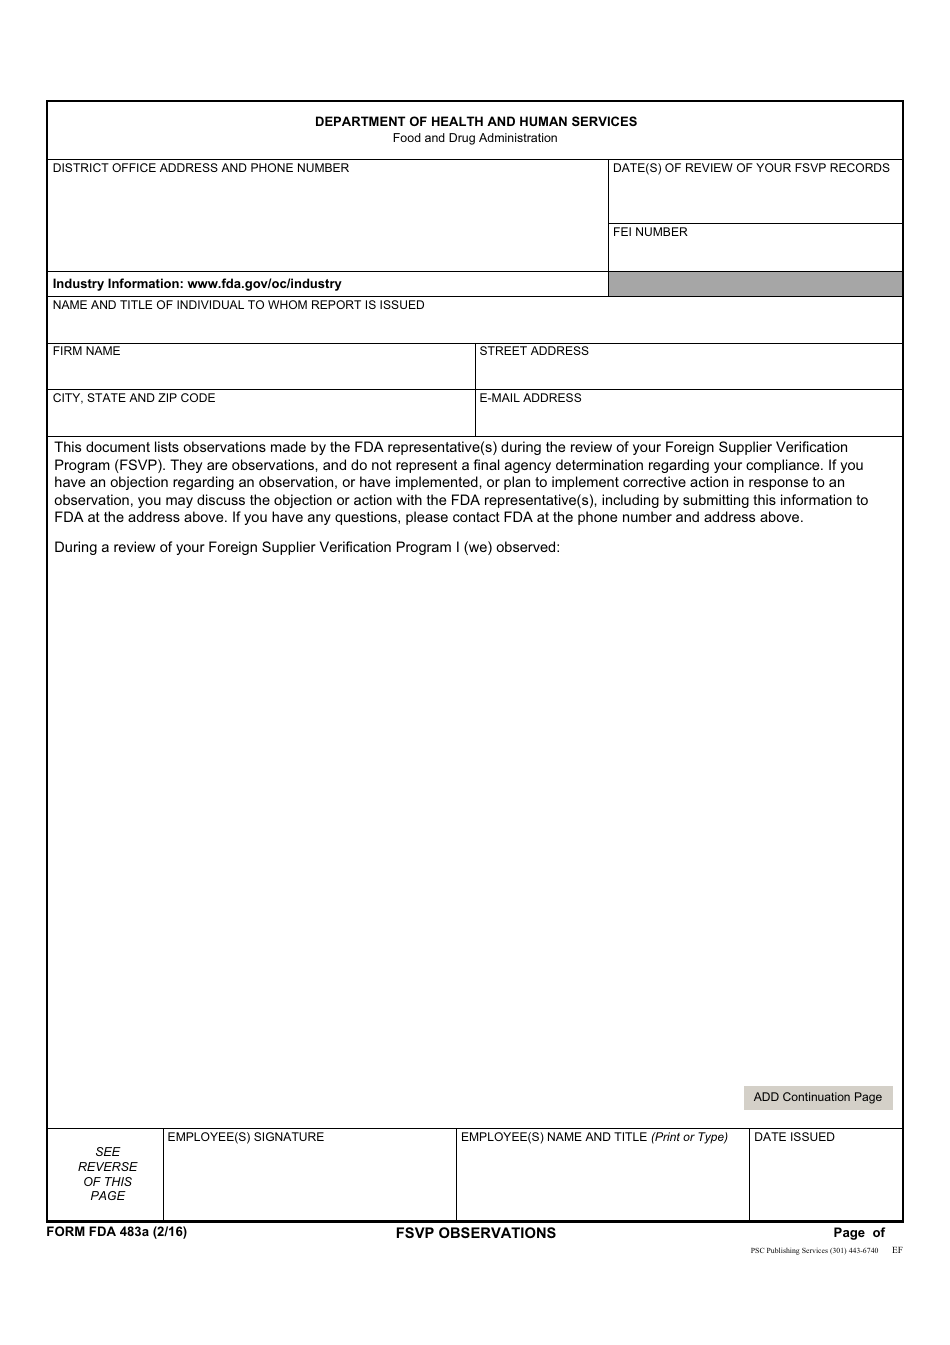 Form FDA483a Fsvp Observations, Page 1